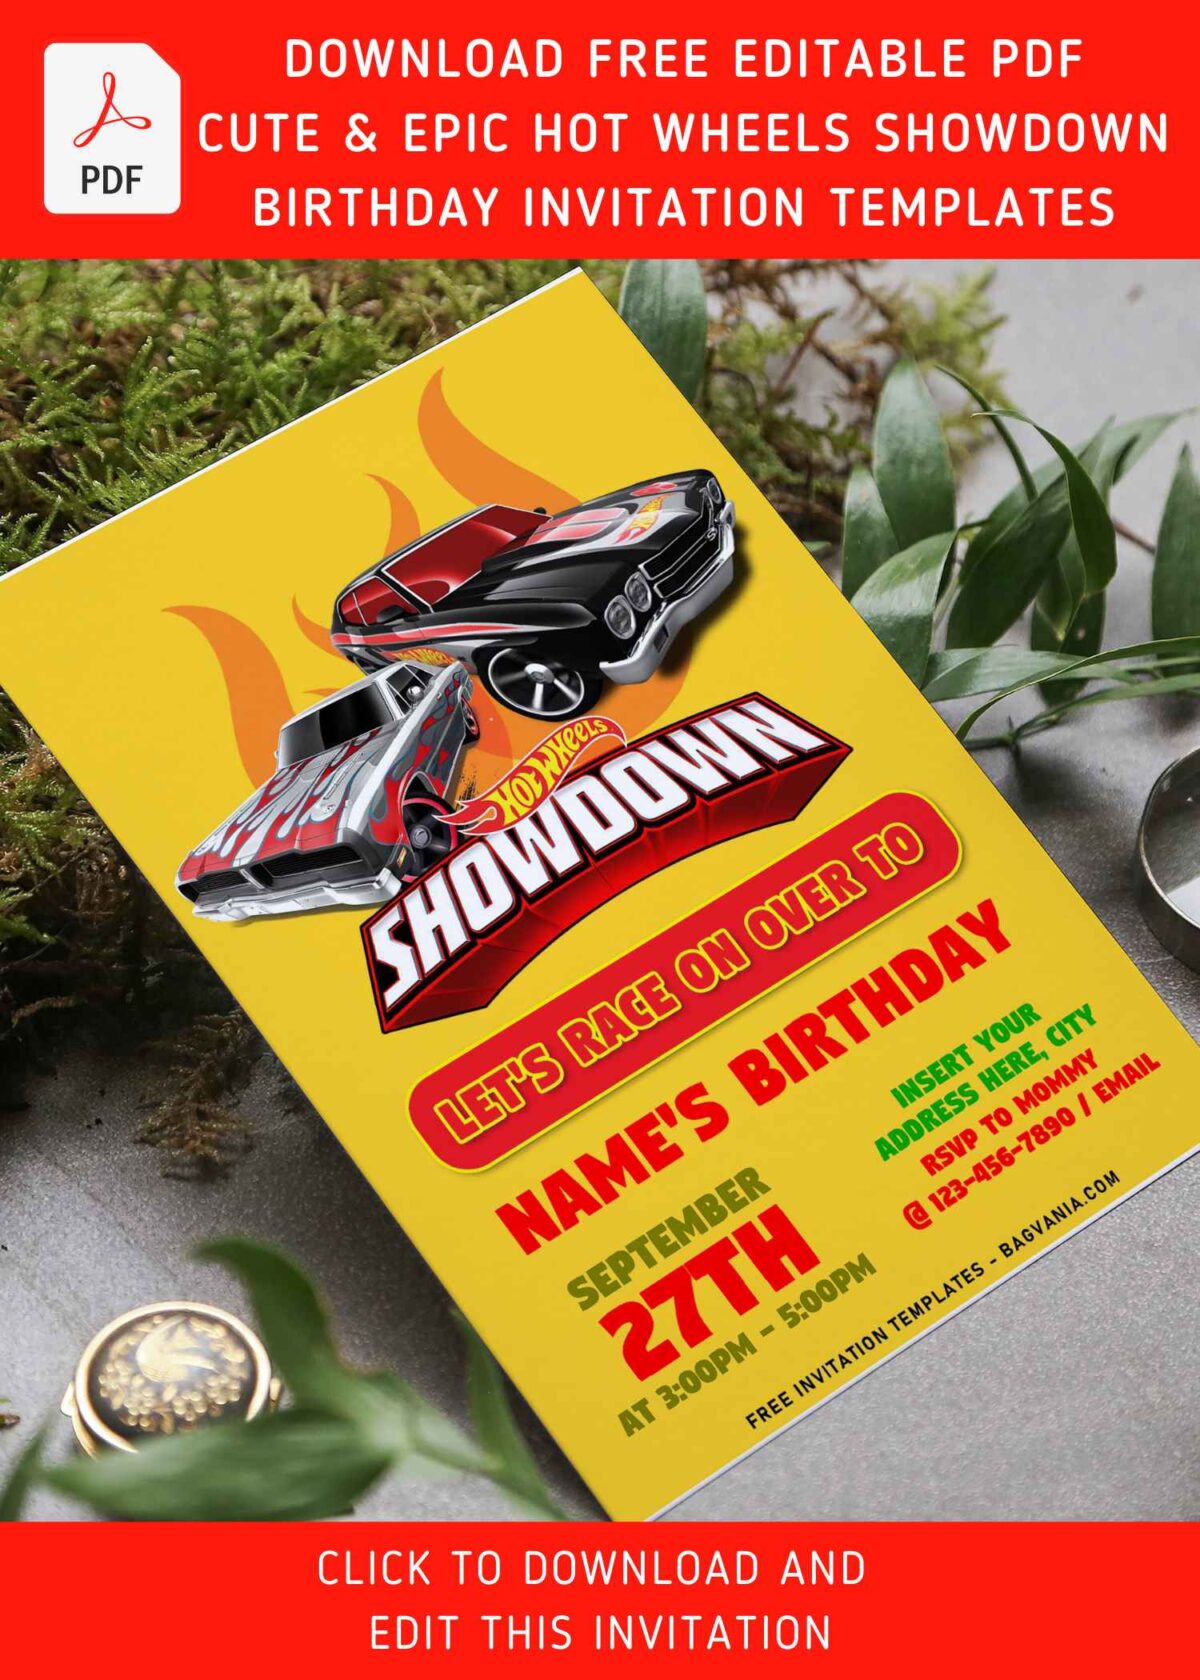 (Free Editable PDF) Race With The Winner Hot Wheels Birthday Invitation Templates with flaming decal